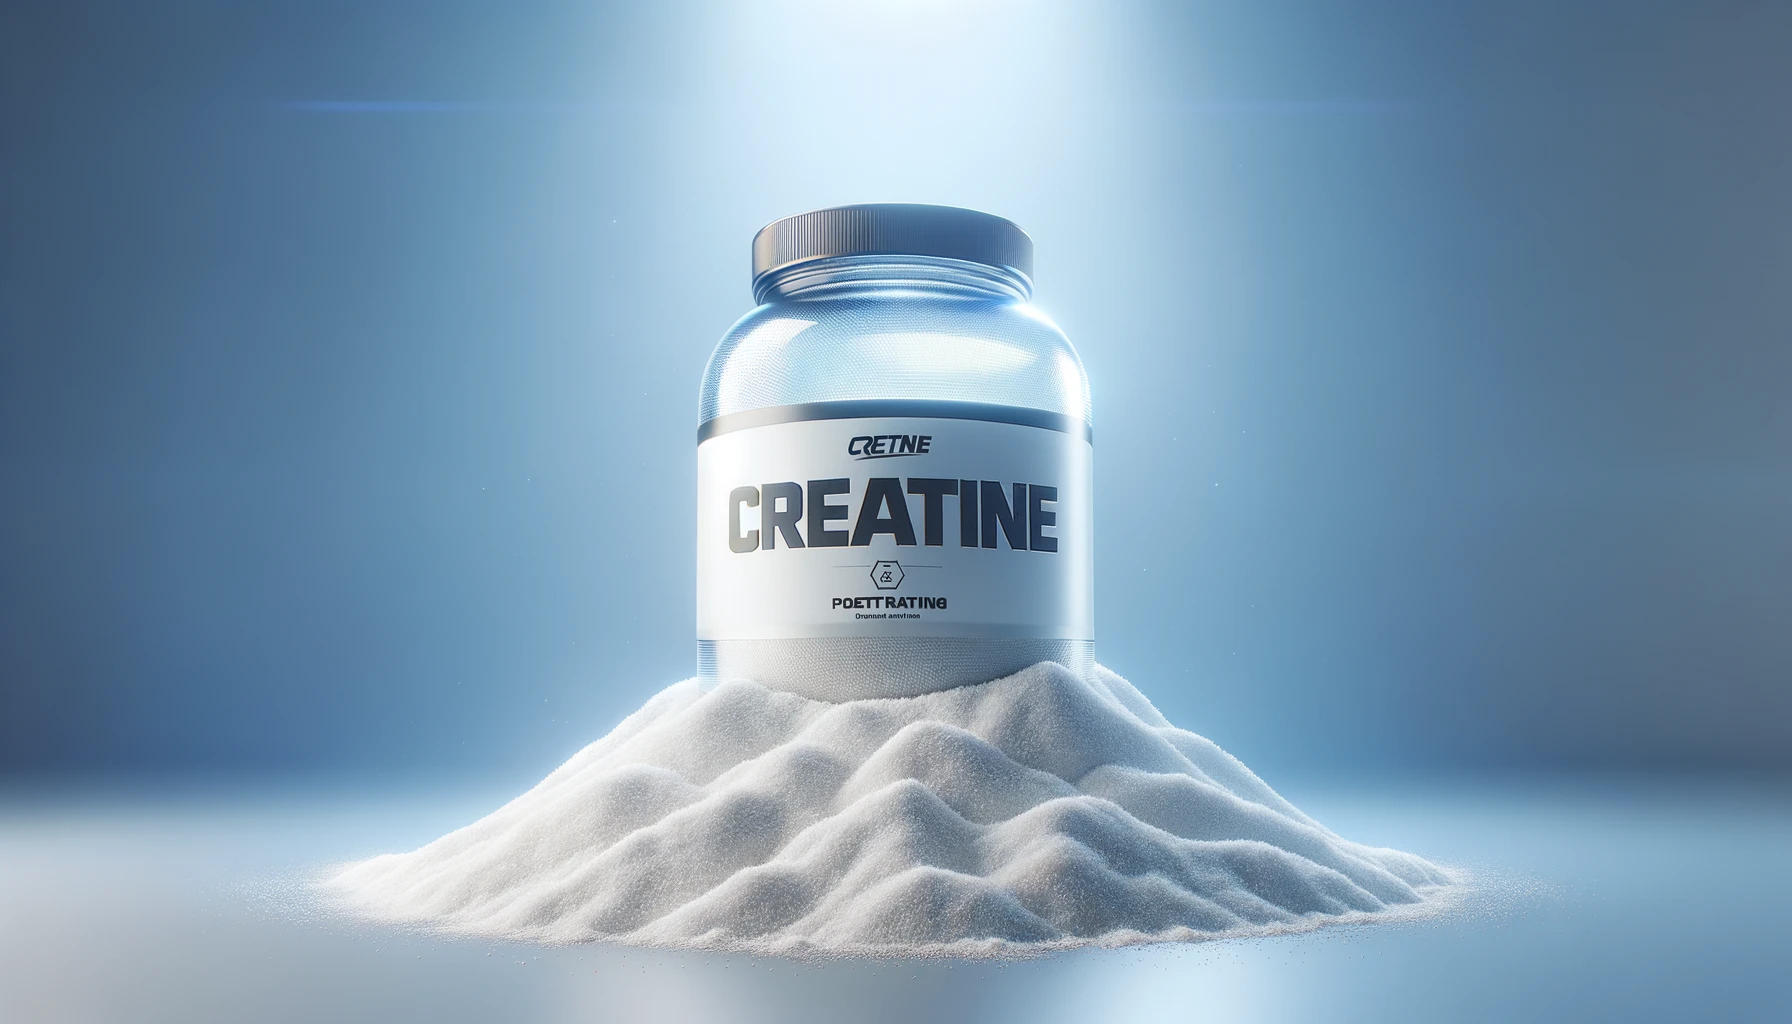 Is There a Difference in Creatine Absorption Rates Post-Workout Between Different Forms of Creatine?